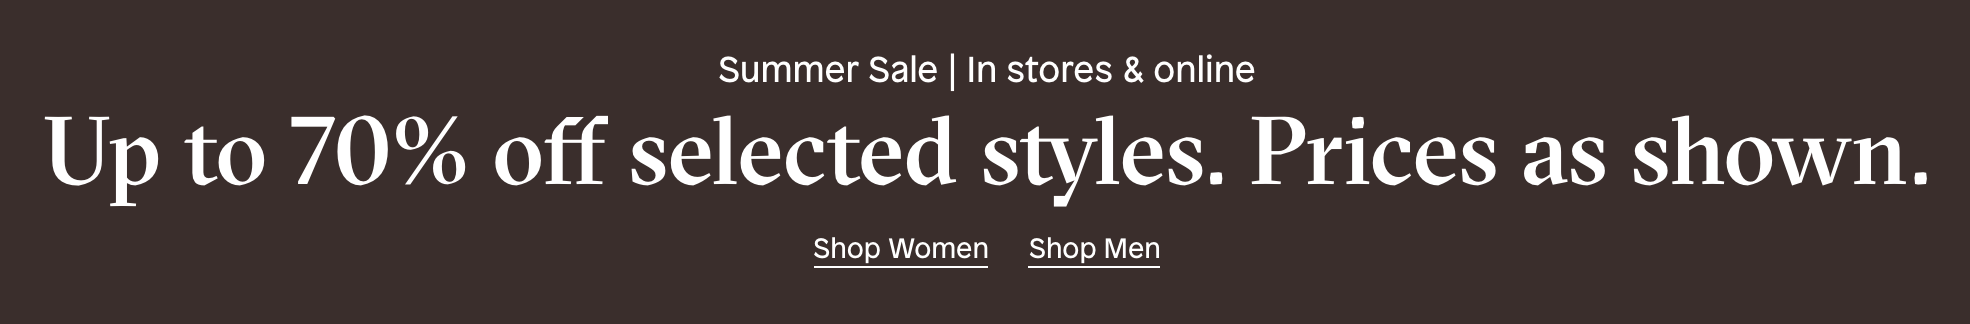 Aldo Shoes: Sale up to 70% off selected shoes styles